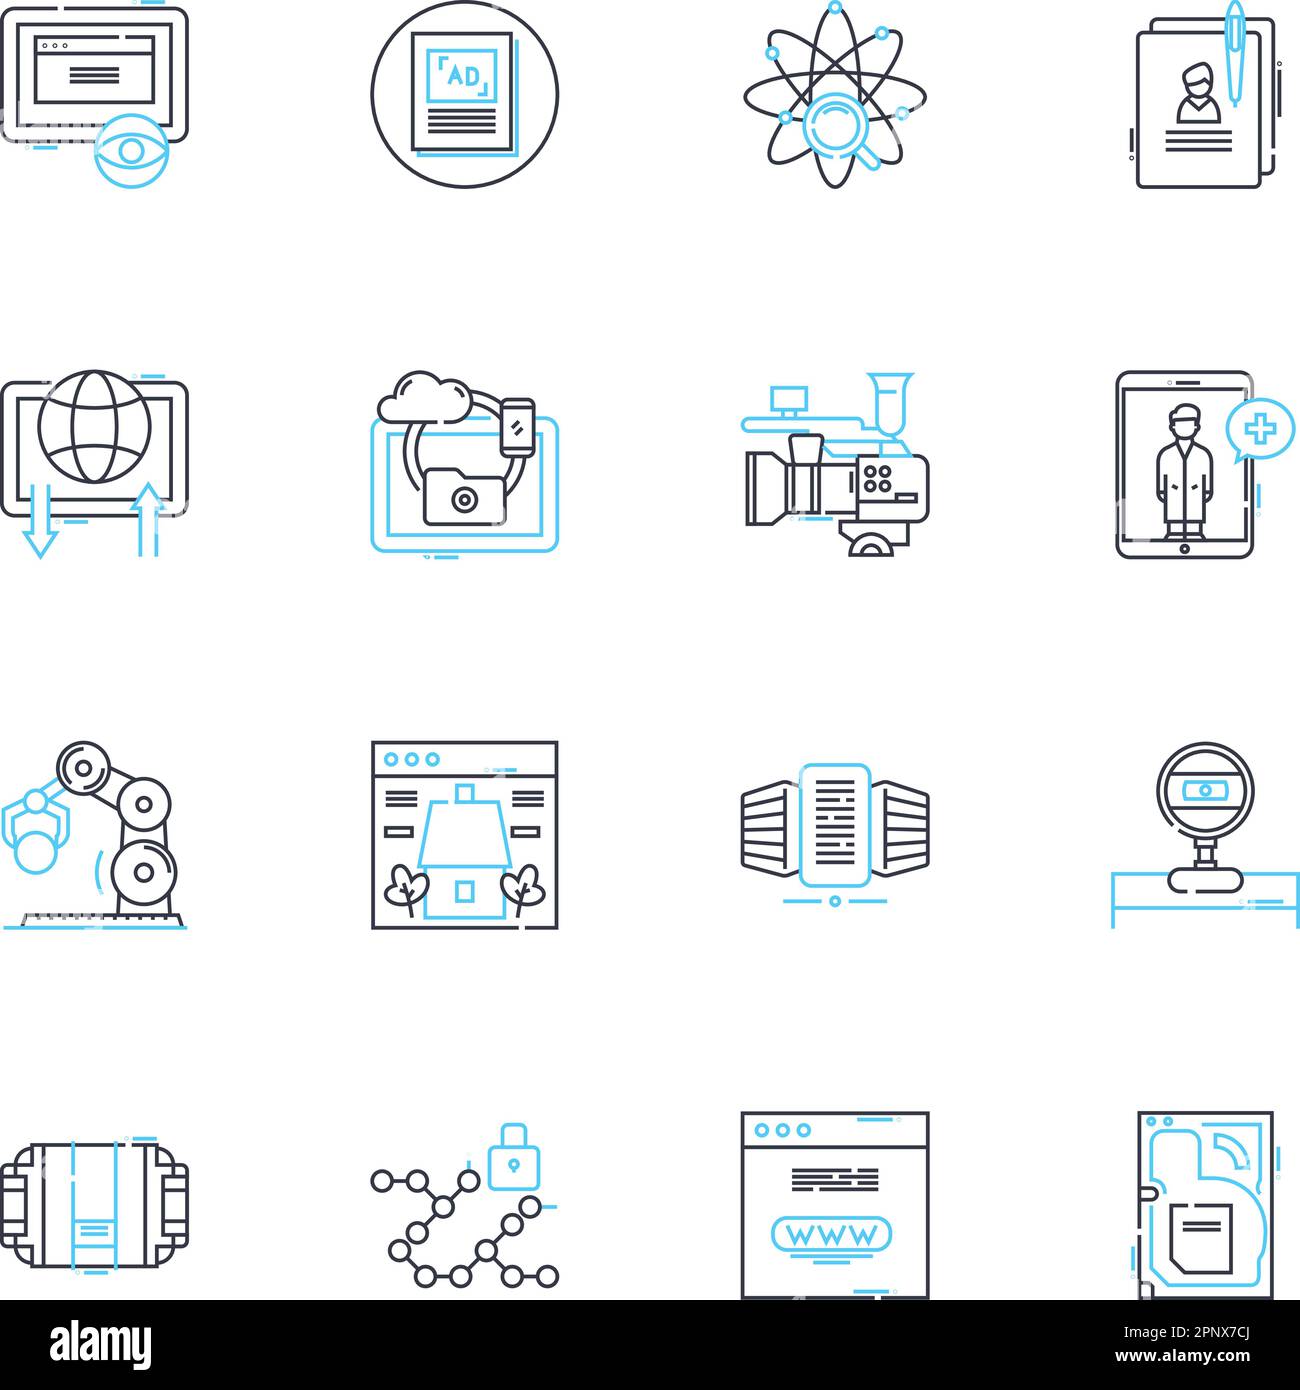 Appliance linear icons set. Refrigerator, Microwave, Dishwasher, Oven, Blender, Juicer, Food processor line vector and concept signs. Toaster,Coffee Stock Vector